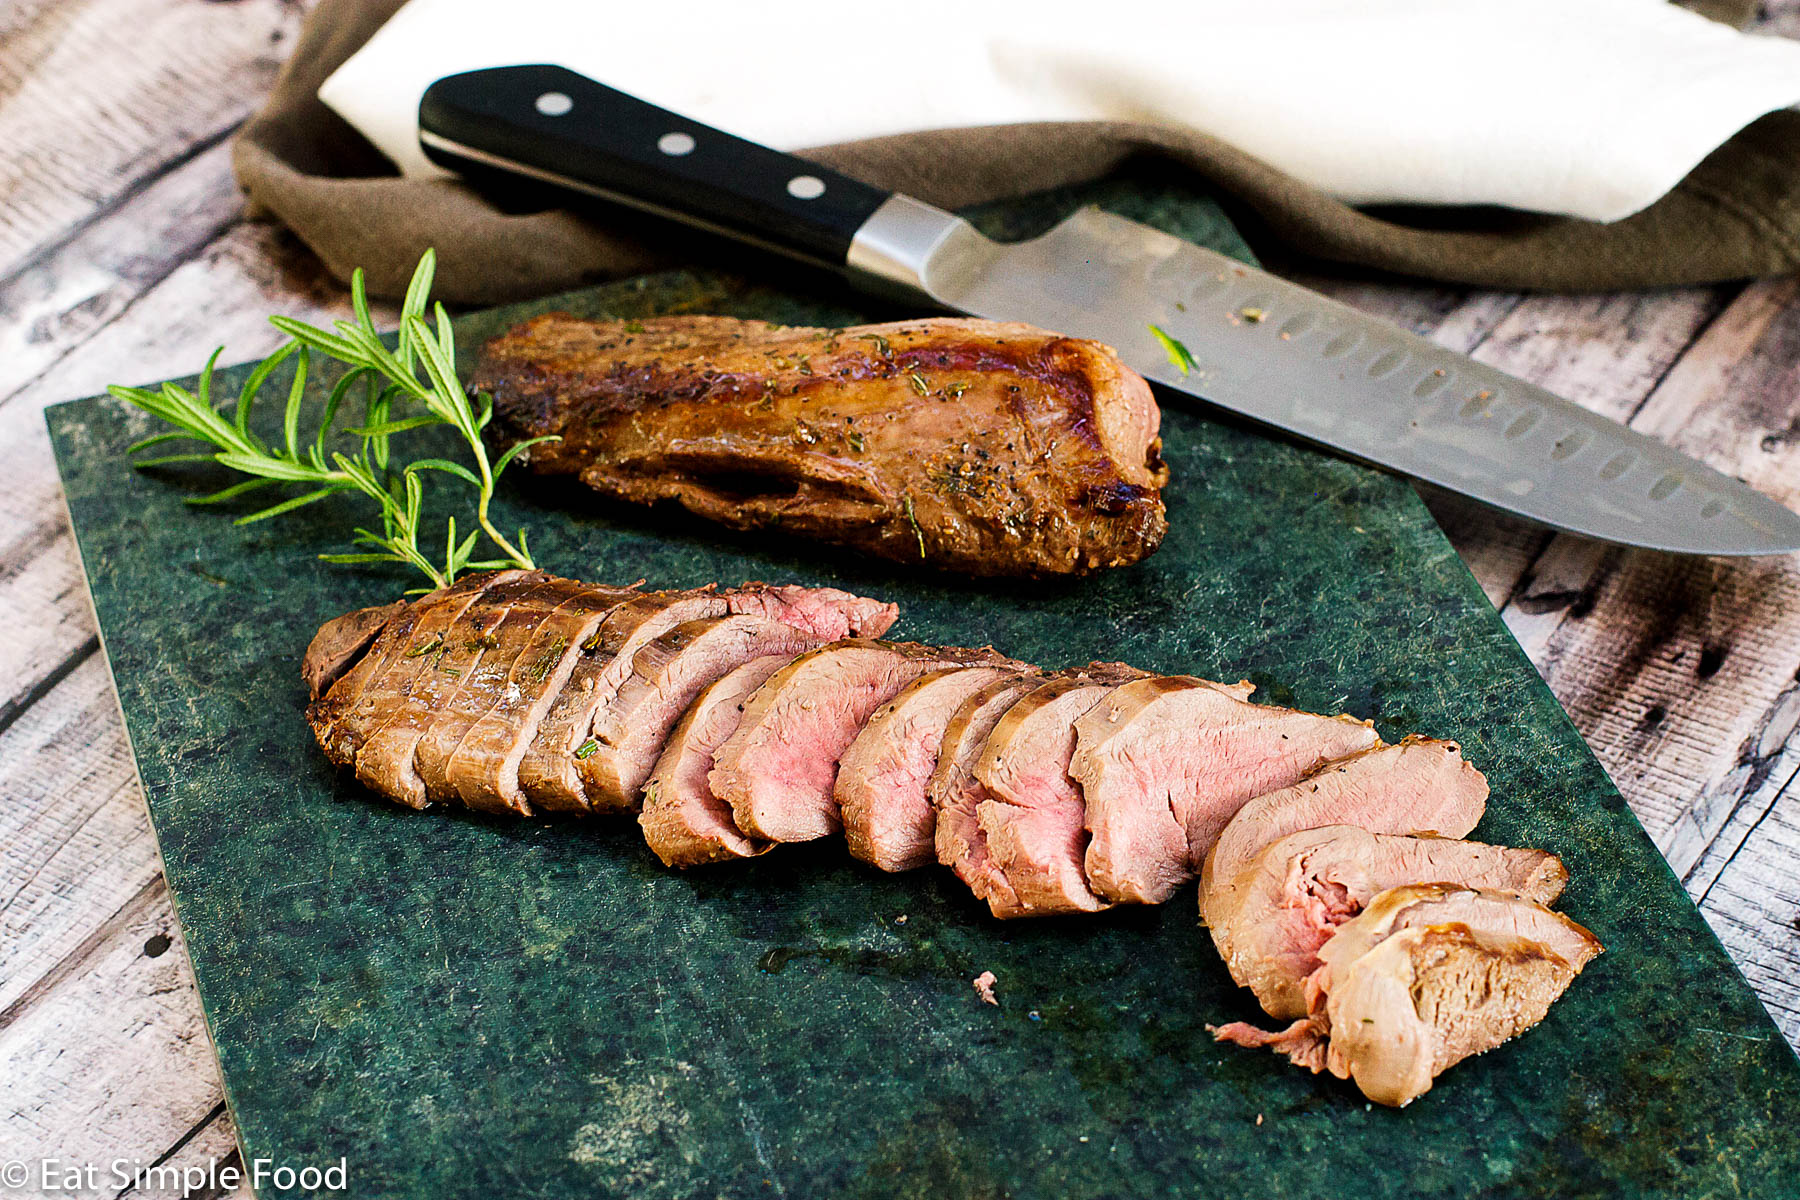 Sliced deer tenderloin on a dark green cutting board with a sprig of rosemary - Eat Simple Food